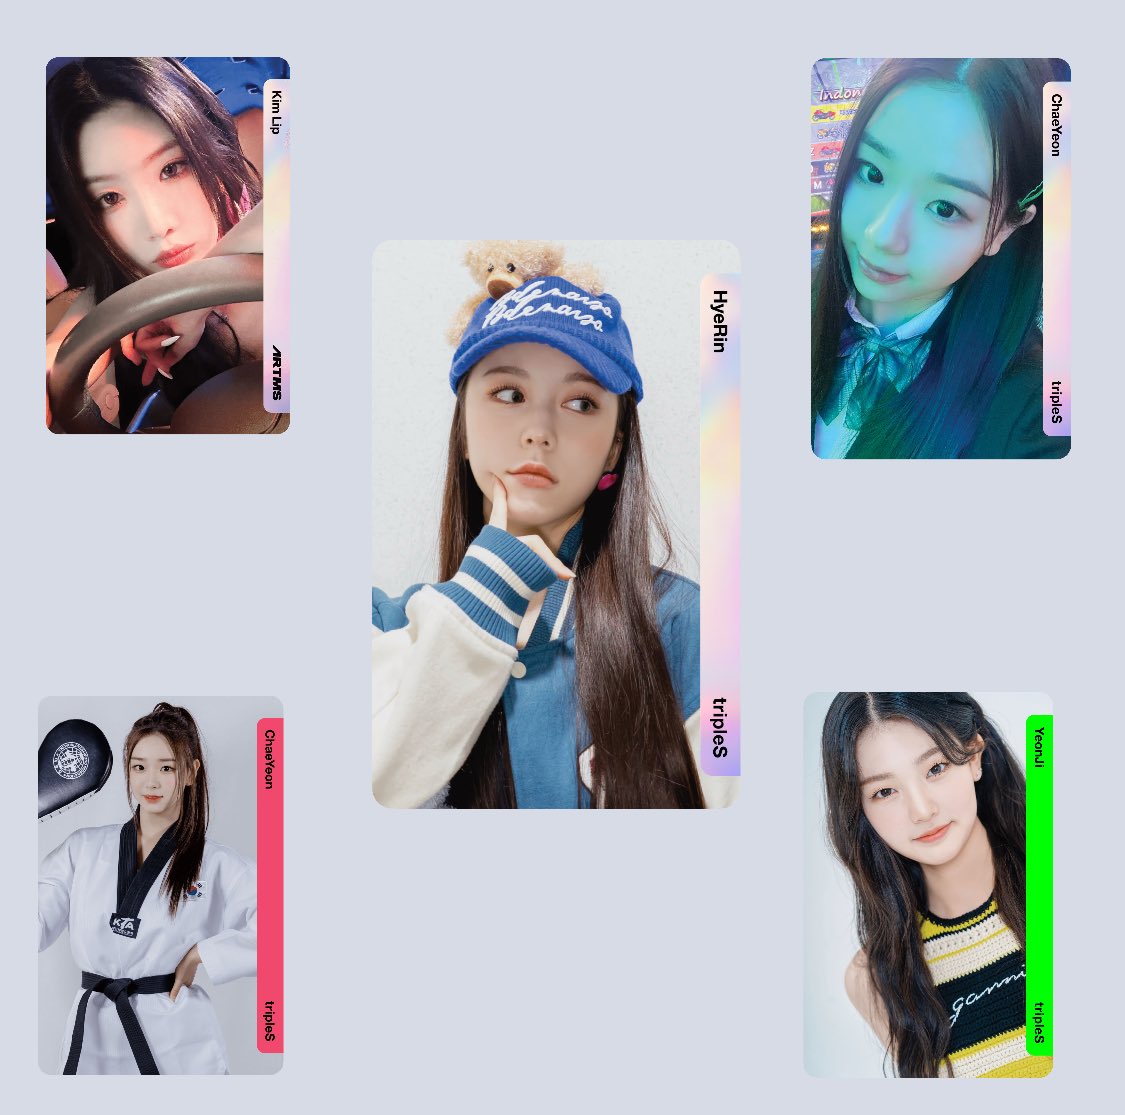 tripleS & ARTMS giveaway!

To celebrate Assemble24 I’m doing a GA with Hyerin B209 (Hello82 SCO) as the grand prize!

Rules:
-follow me
-like and retweet 
-comment cosmo ID

Ends 5/12 at 12pm est!

There will be five winners! Extra entry rules in thread ⬇️